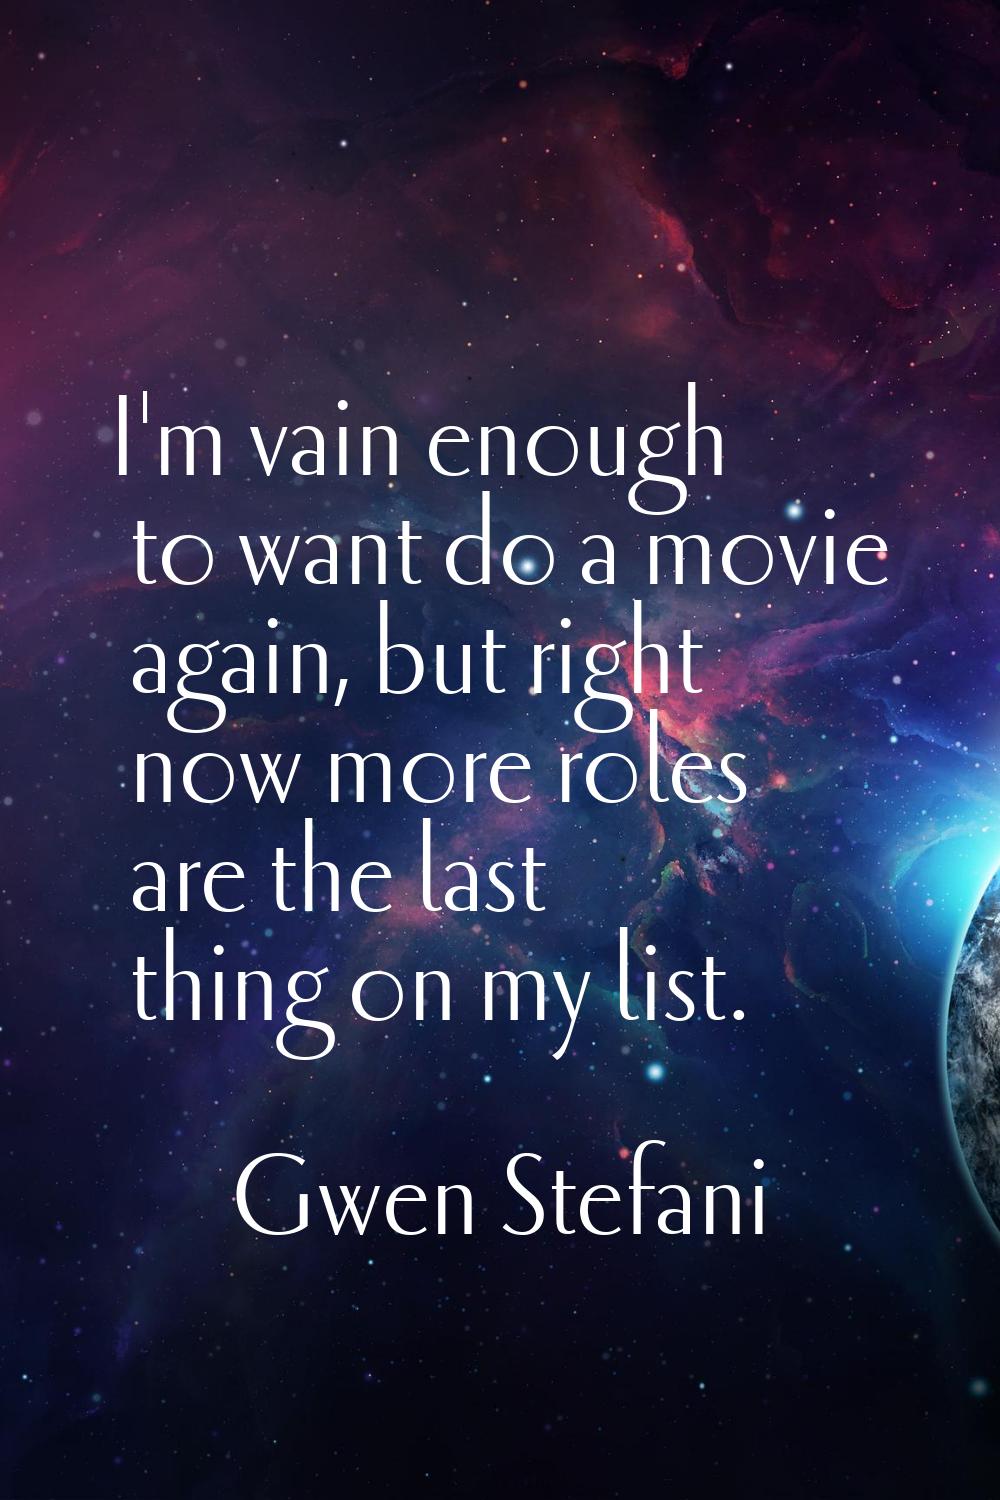 I'm vain enough to want do a movie again, but right now more roles are the last thing on my list.